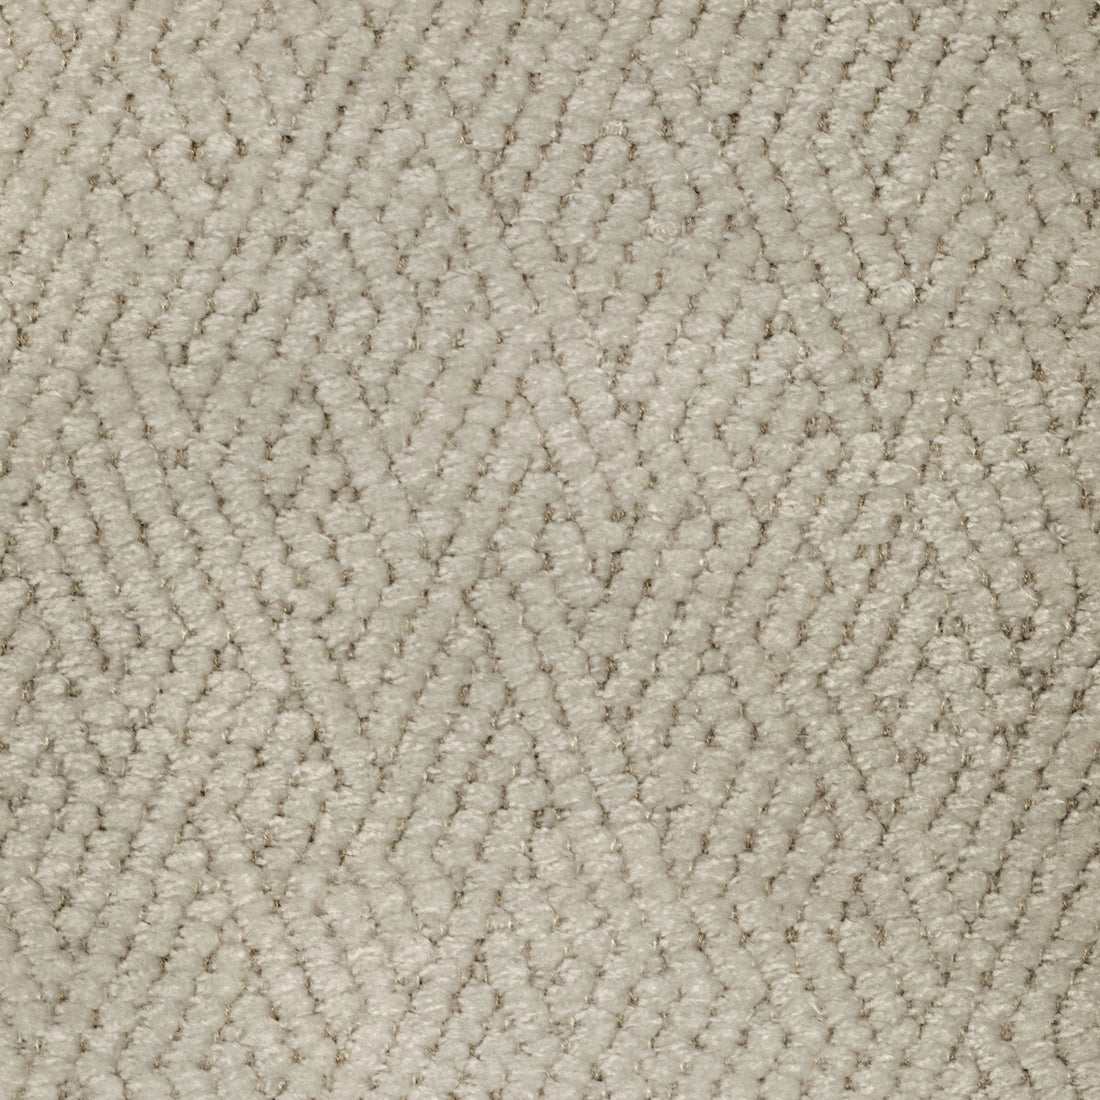 Alonso Weave fabric in stone color - pattern 2021103.11.0 - by Lee Jofa in the Triana Weaves collection